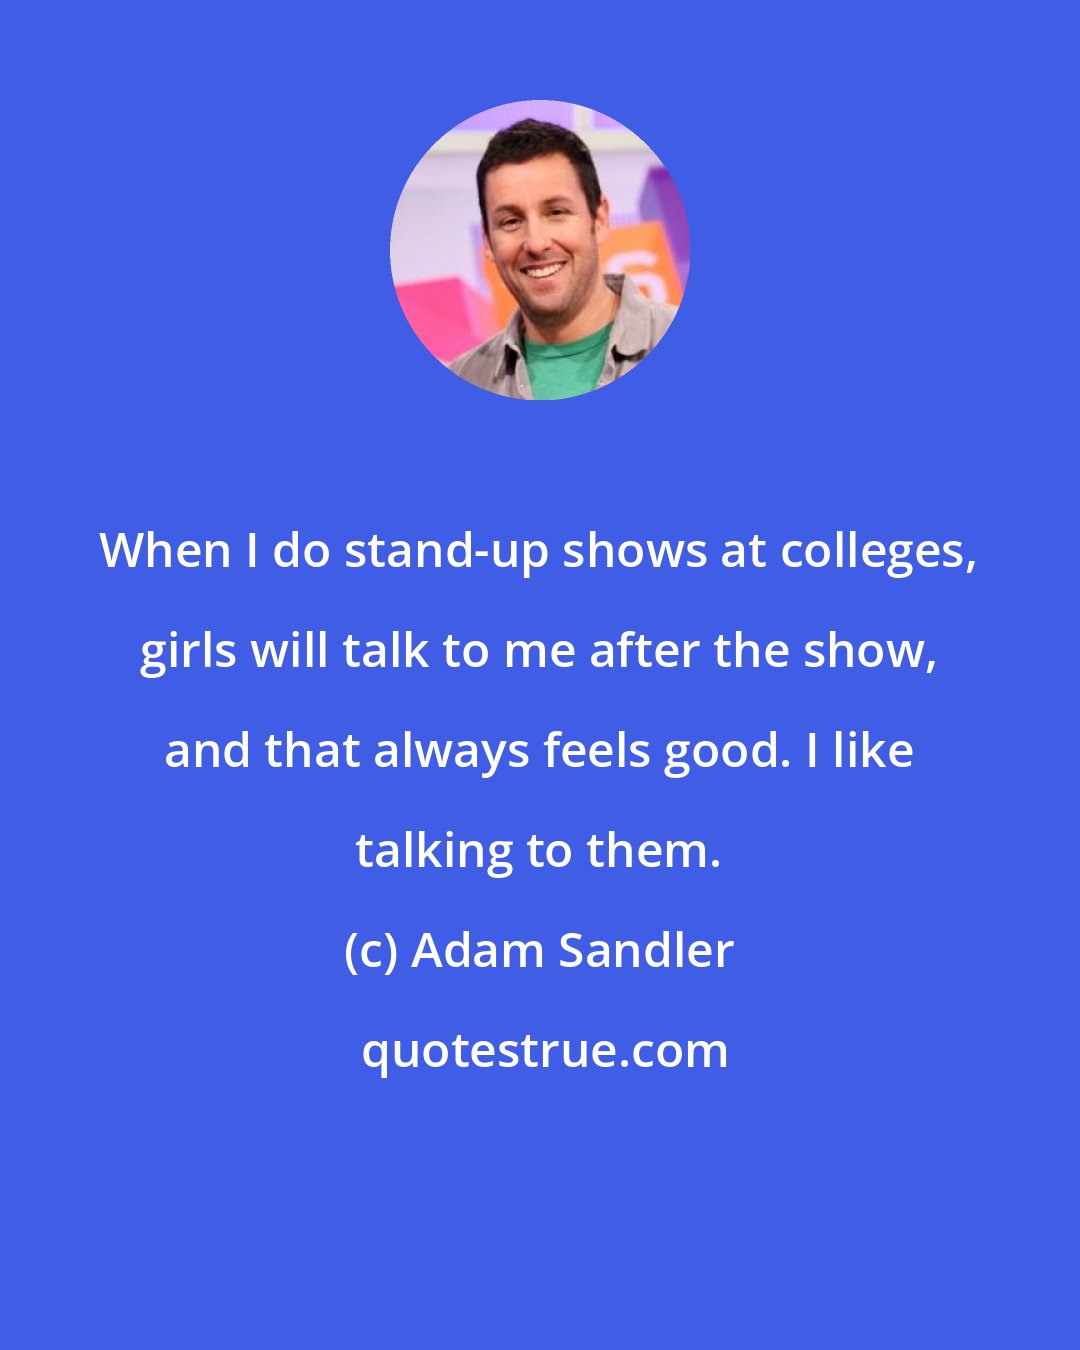 Adam Sandler: When I do stand-up shows at colleges, girls will talk to me after the show, and that always feels good. I like talking to them.